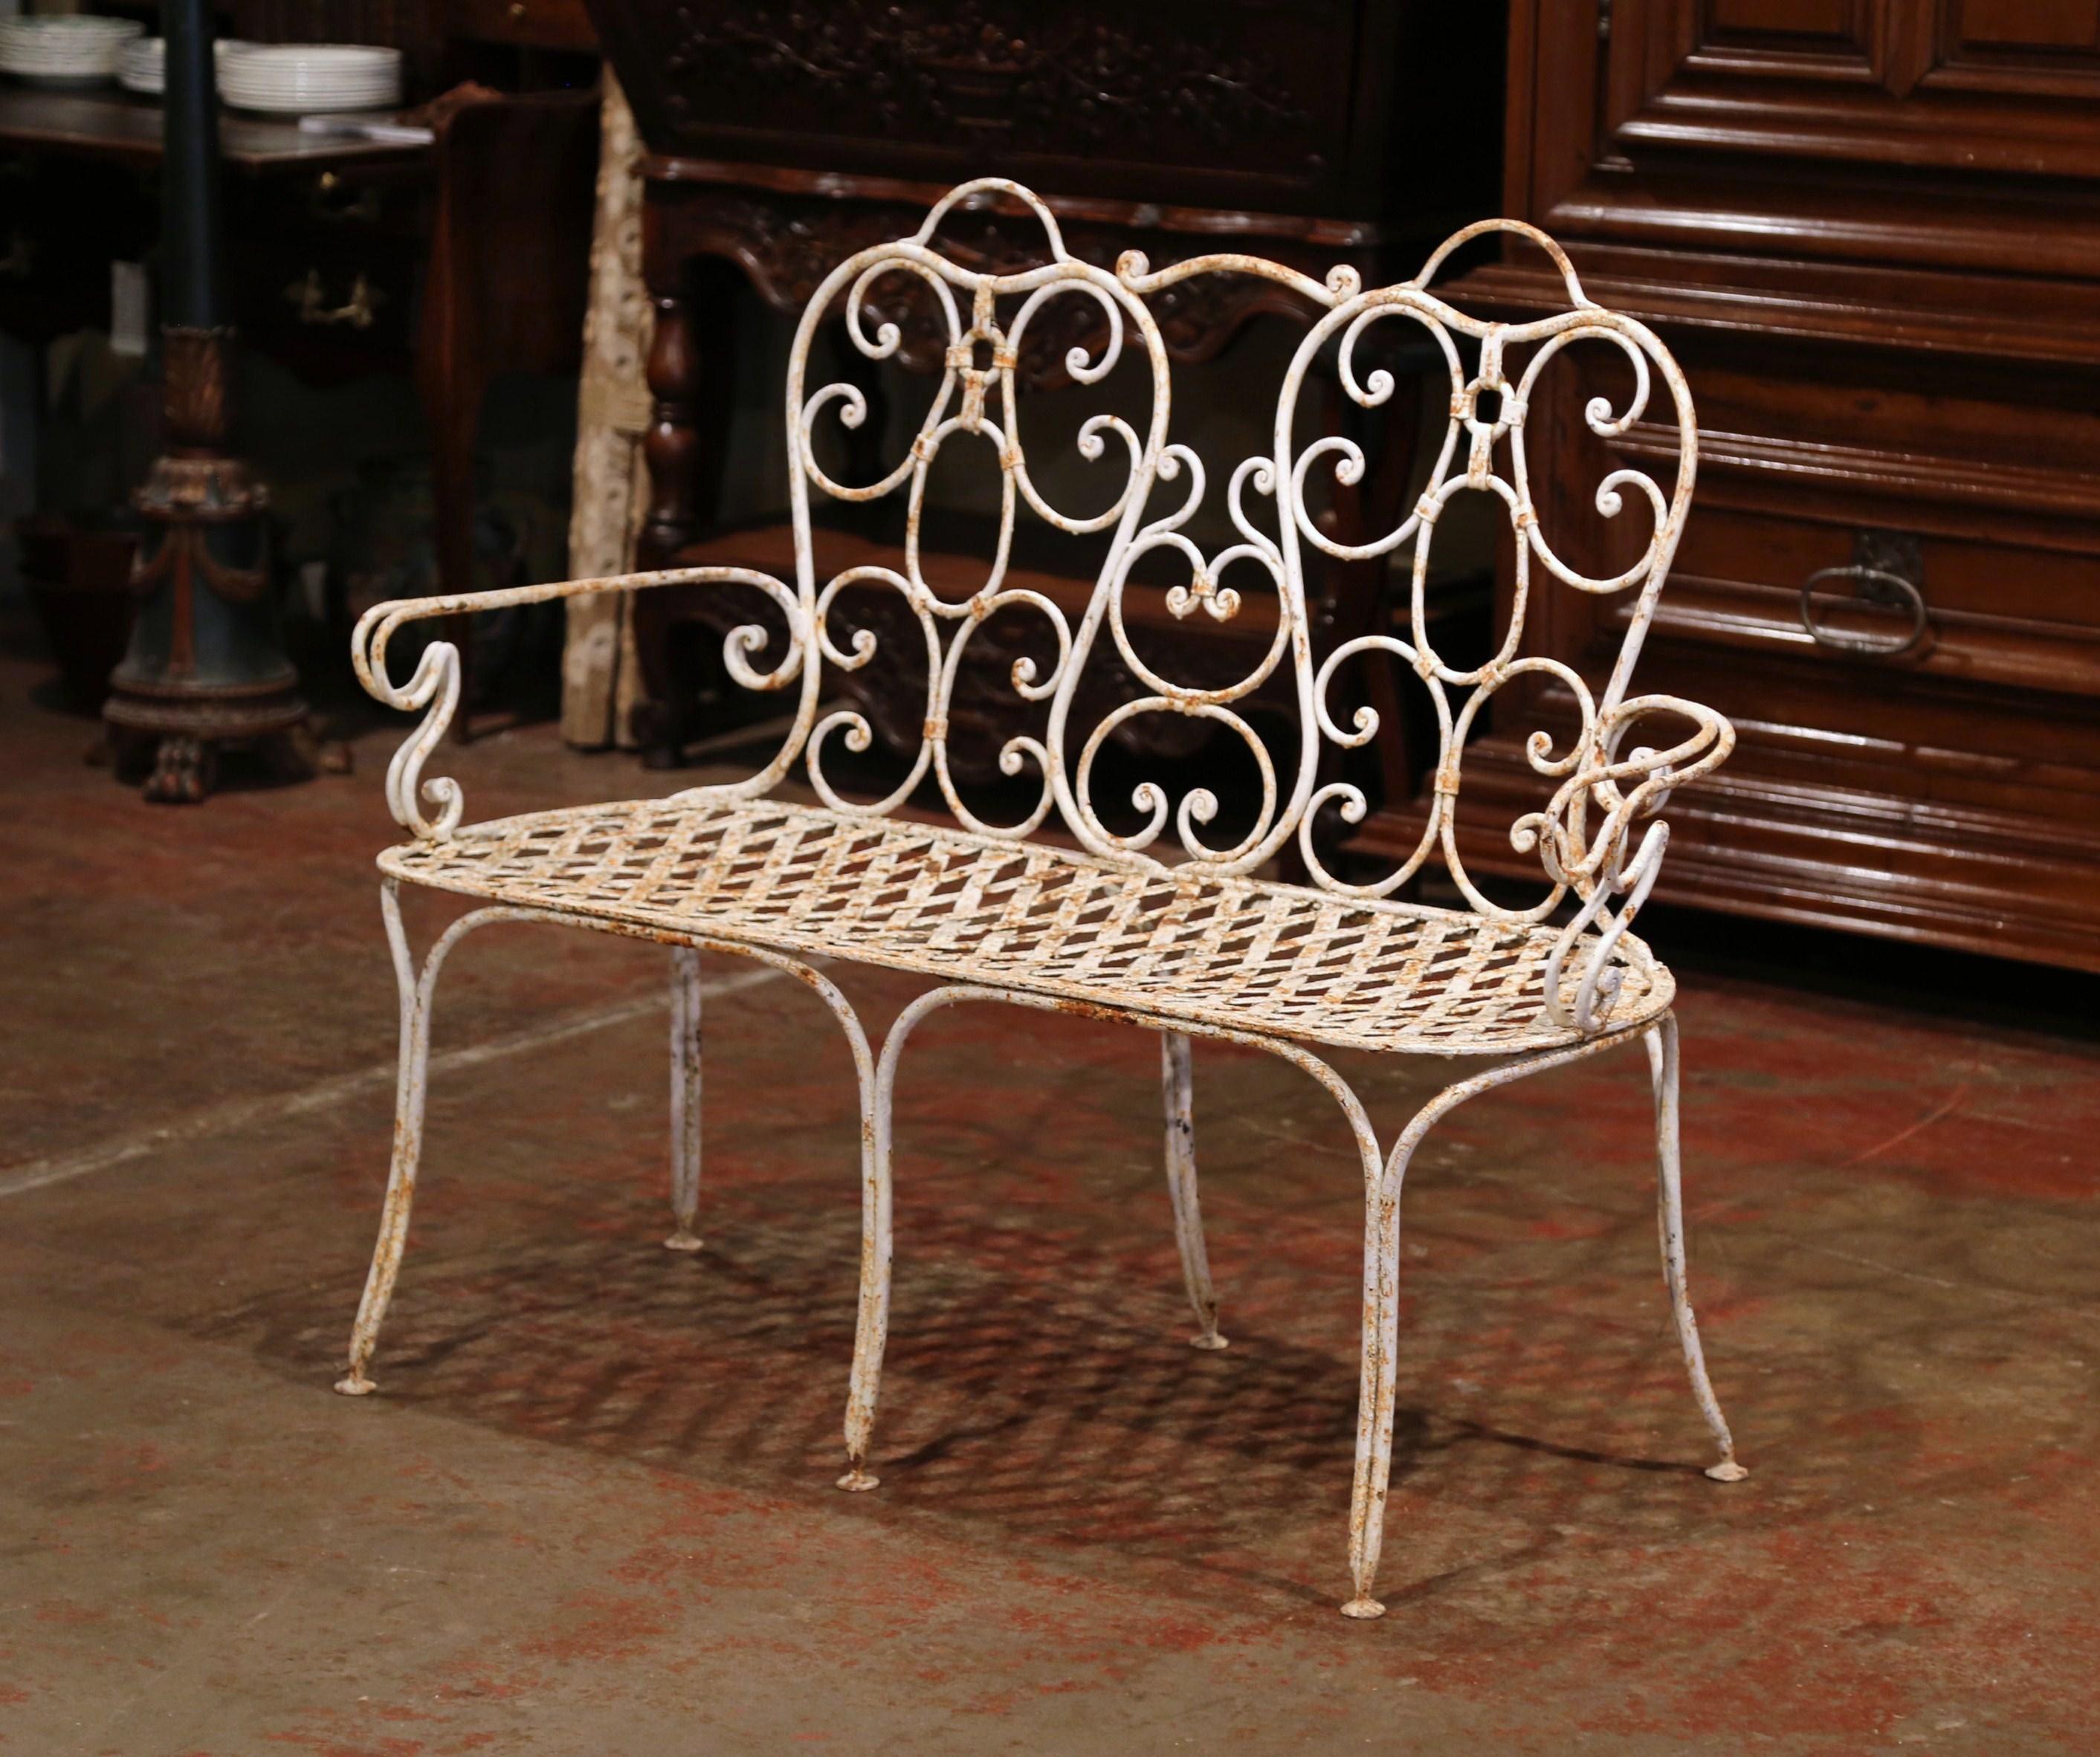 19th Century French Scroll Painted Iron Six-Leg Garden Bench from Normandy 2